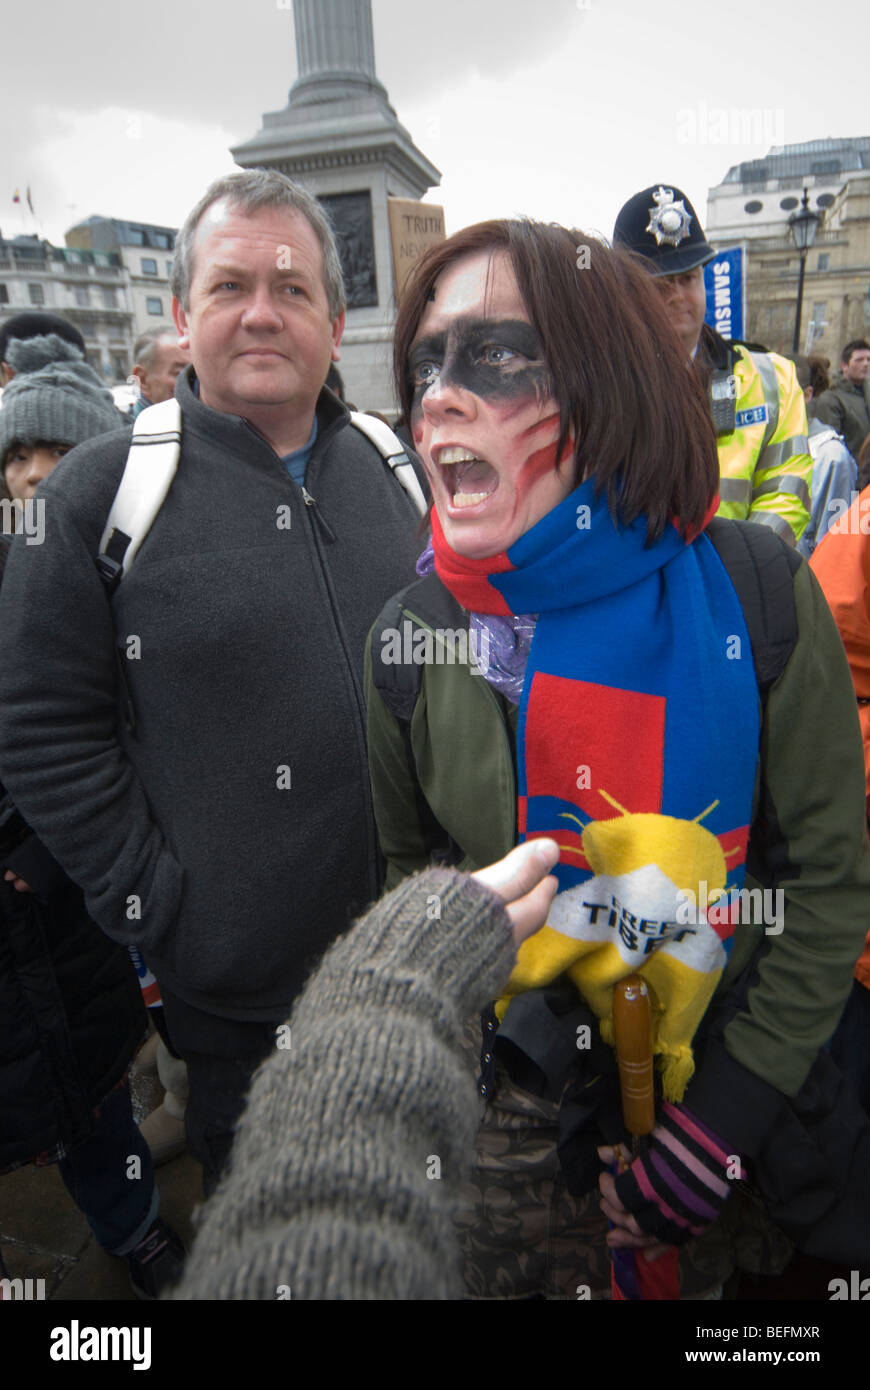 Police watch angry woman pro-Tibet demonstrator in argument in Trafalgar Sq as Beijing Olympic relay passes through London Stock Photo